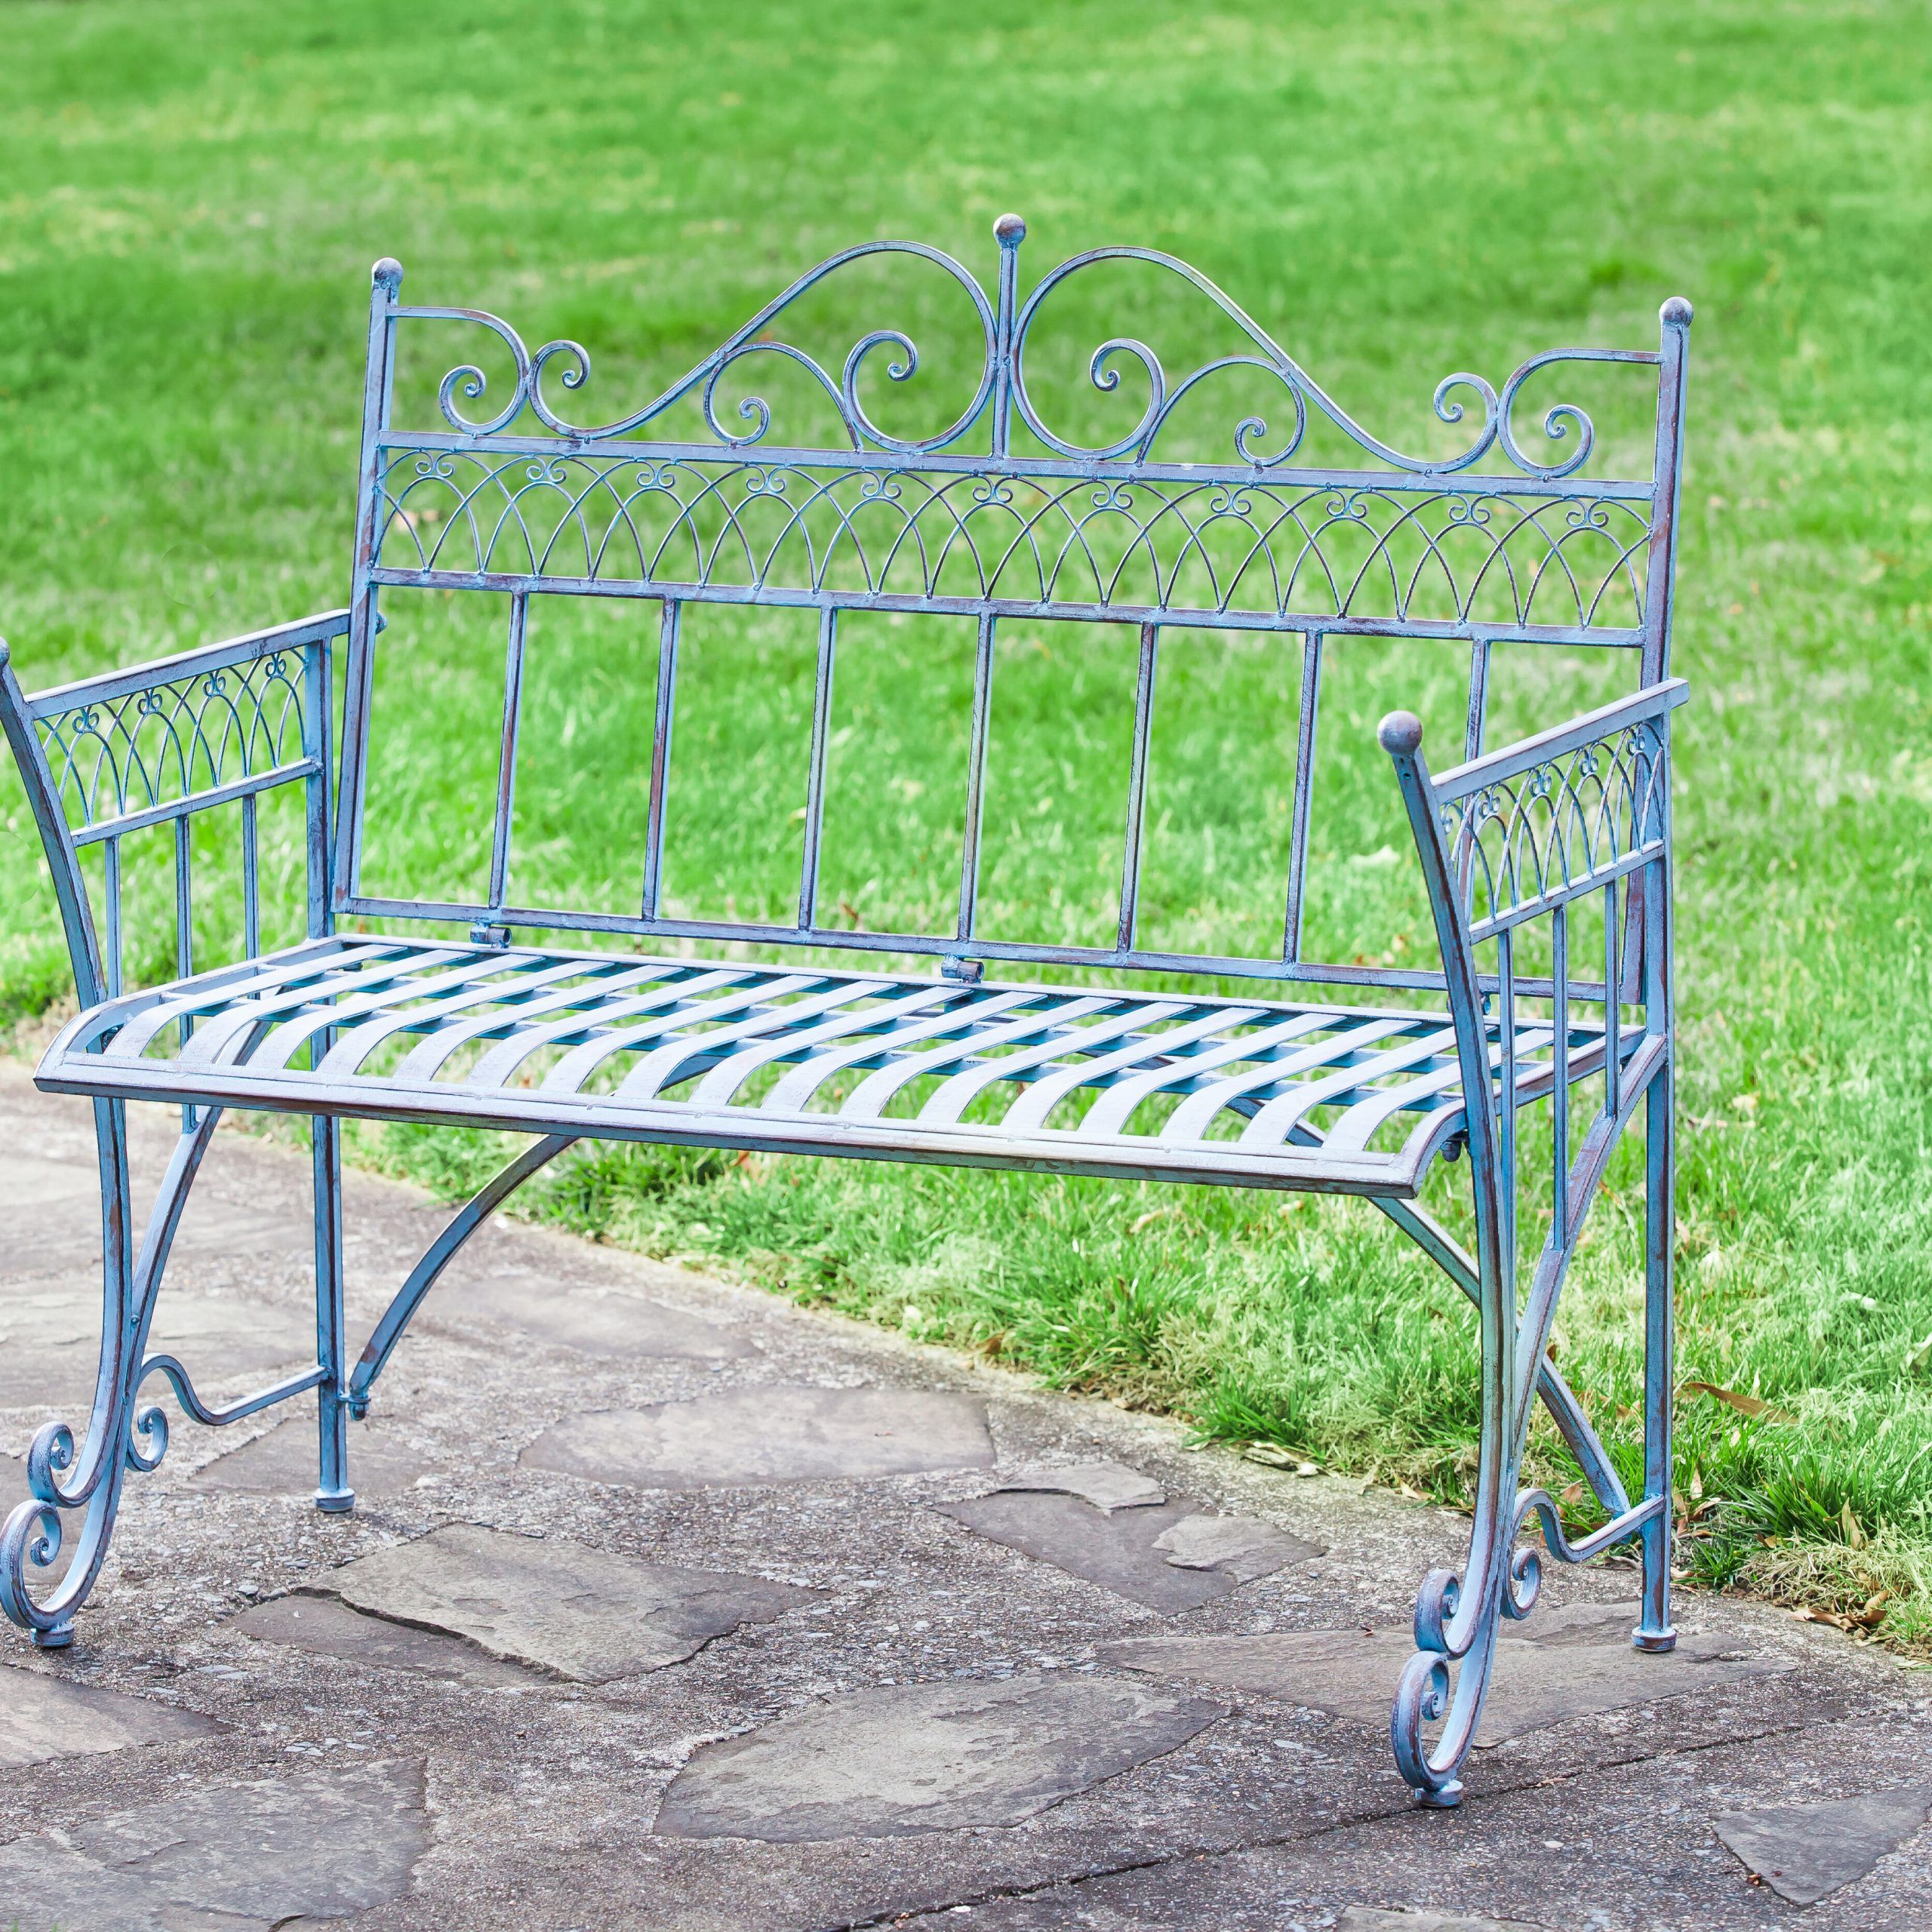 Heslin Steel Park Benches Pertaining To Famous Trudy Victorian Metal Garden Bench (View 13 of 30)